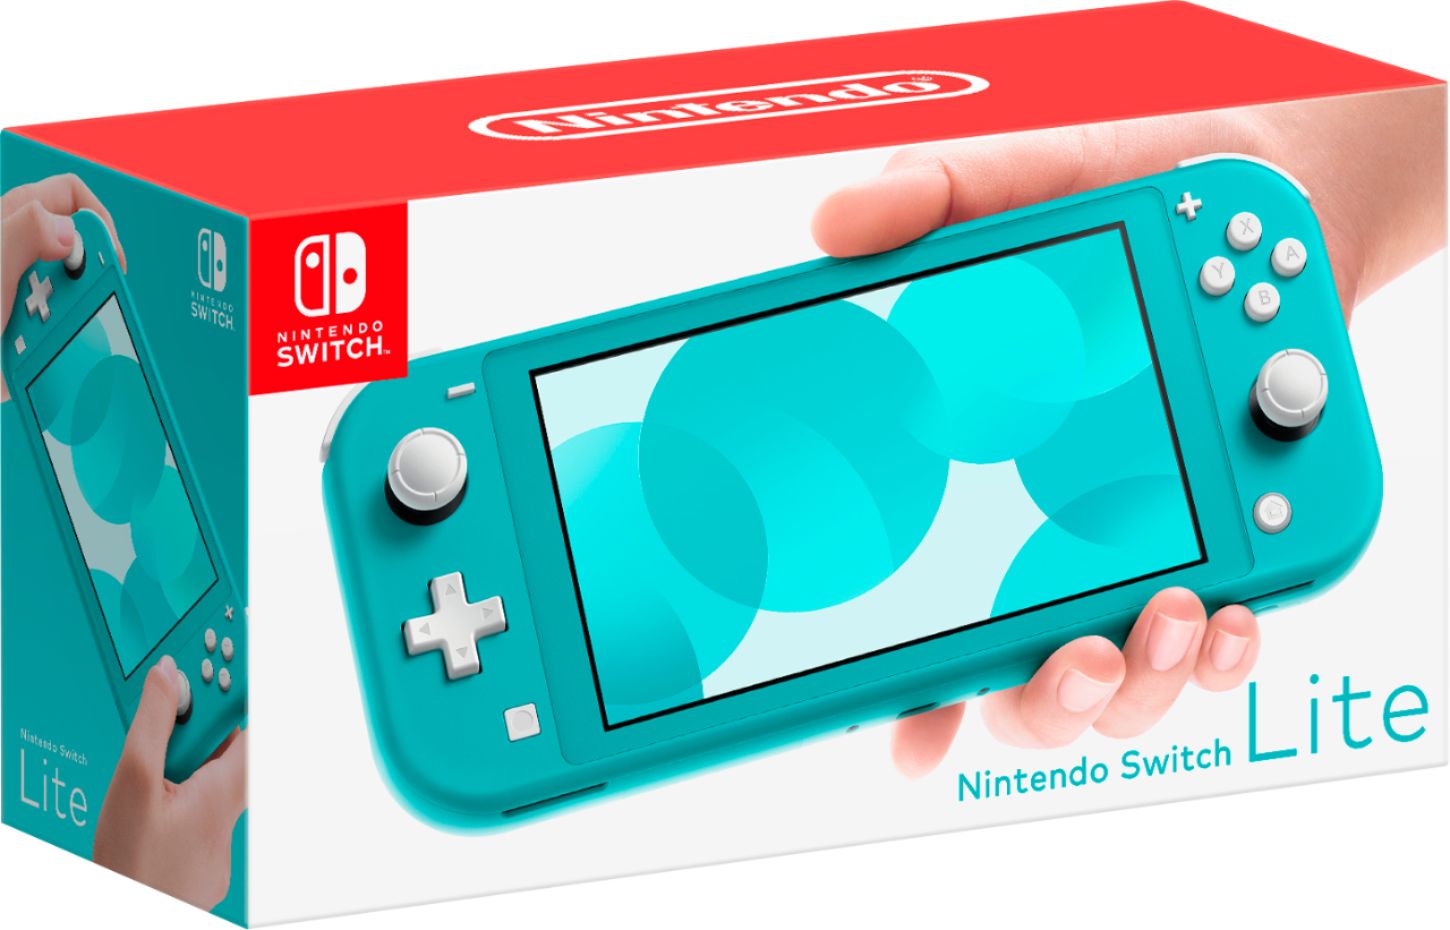 Nintendo Switch Lite Turquoise with Grand Theft Auto: The Trilogy, Mytrix 128GB MicroSD Card and Accessories NS Game Disc Bundle Best Holiday Gift